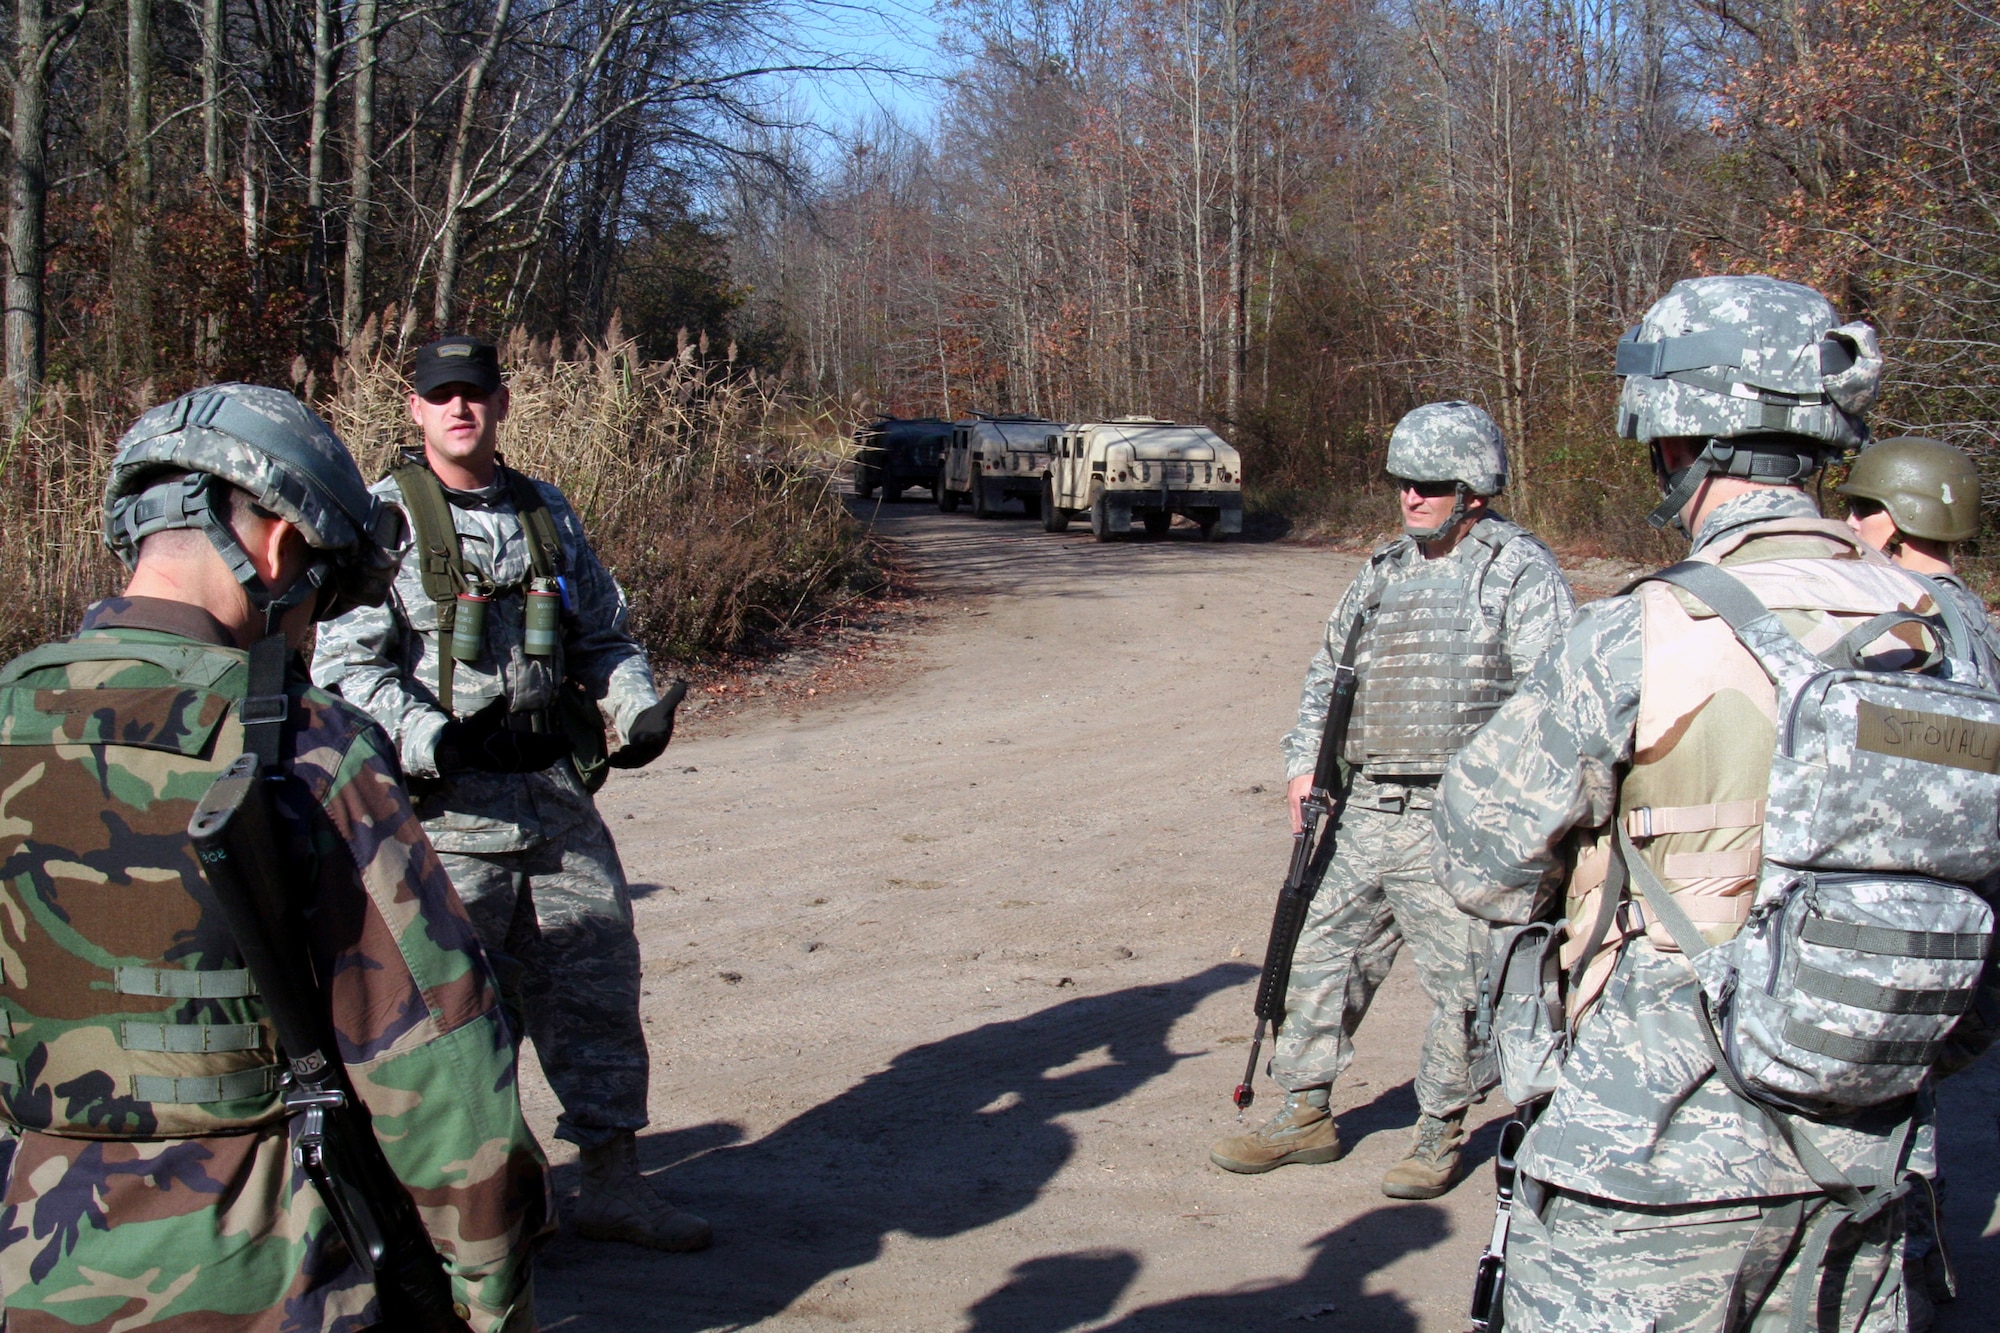 Tech. Sgt. John Gray (left-center), combat skills instructor, provides a briefing to students in the Combat Airman Skills Training Course 10-1A during mounted patrol operations, or convoy, training in the course on Nov. 8, 2009, at Joint Base McGuire-Dix-Lakehurst, N.J.  The course, taught by the U.S. Air Force Expeditionary Center's 421st Combat Training Squadron, prepare Airmen for upcoming deployments.  (U.S. Air Force Photo/Tech. Sgt. Scott T. Sturkol)